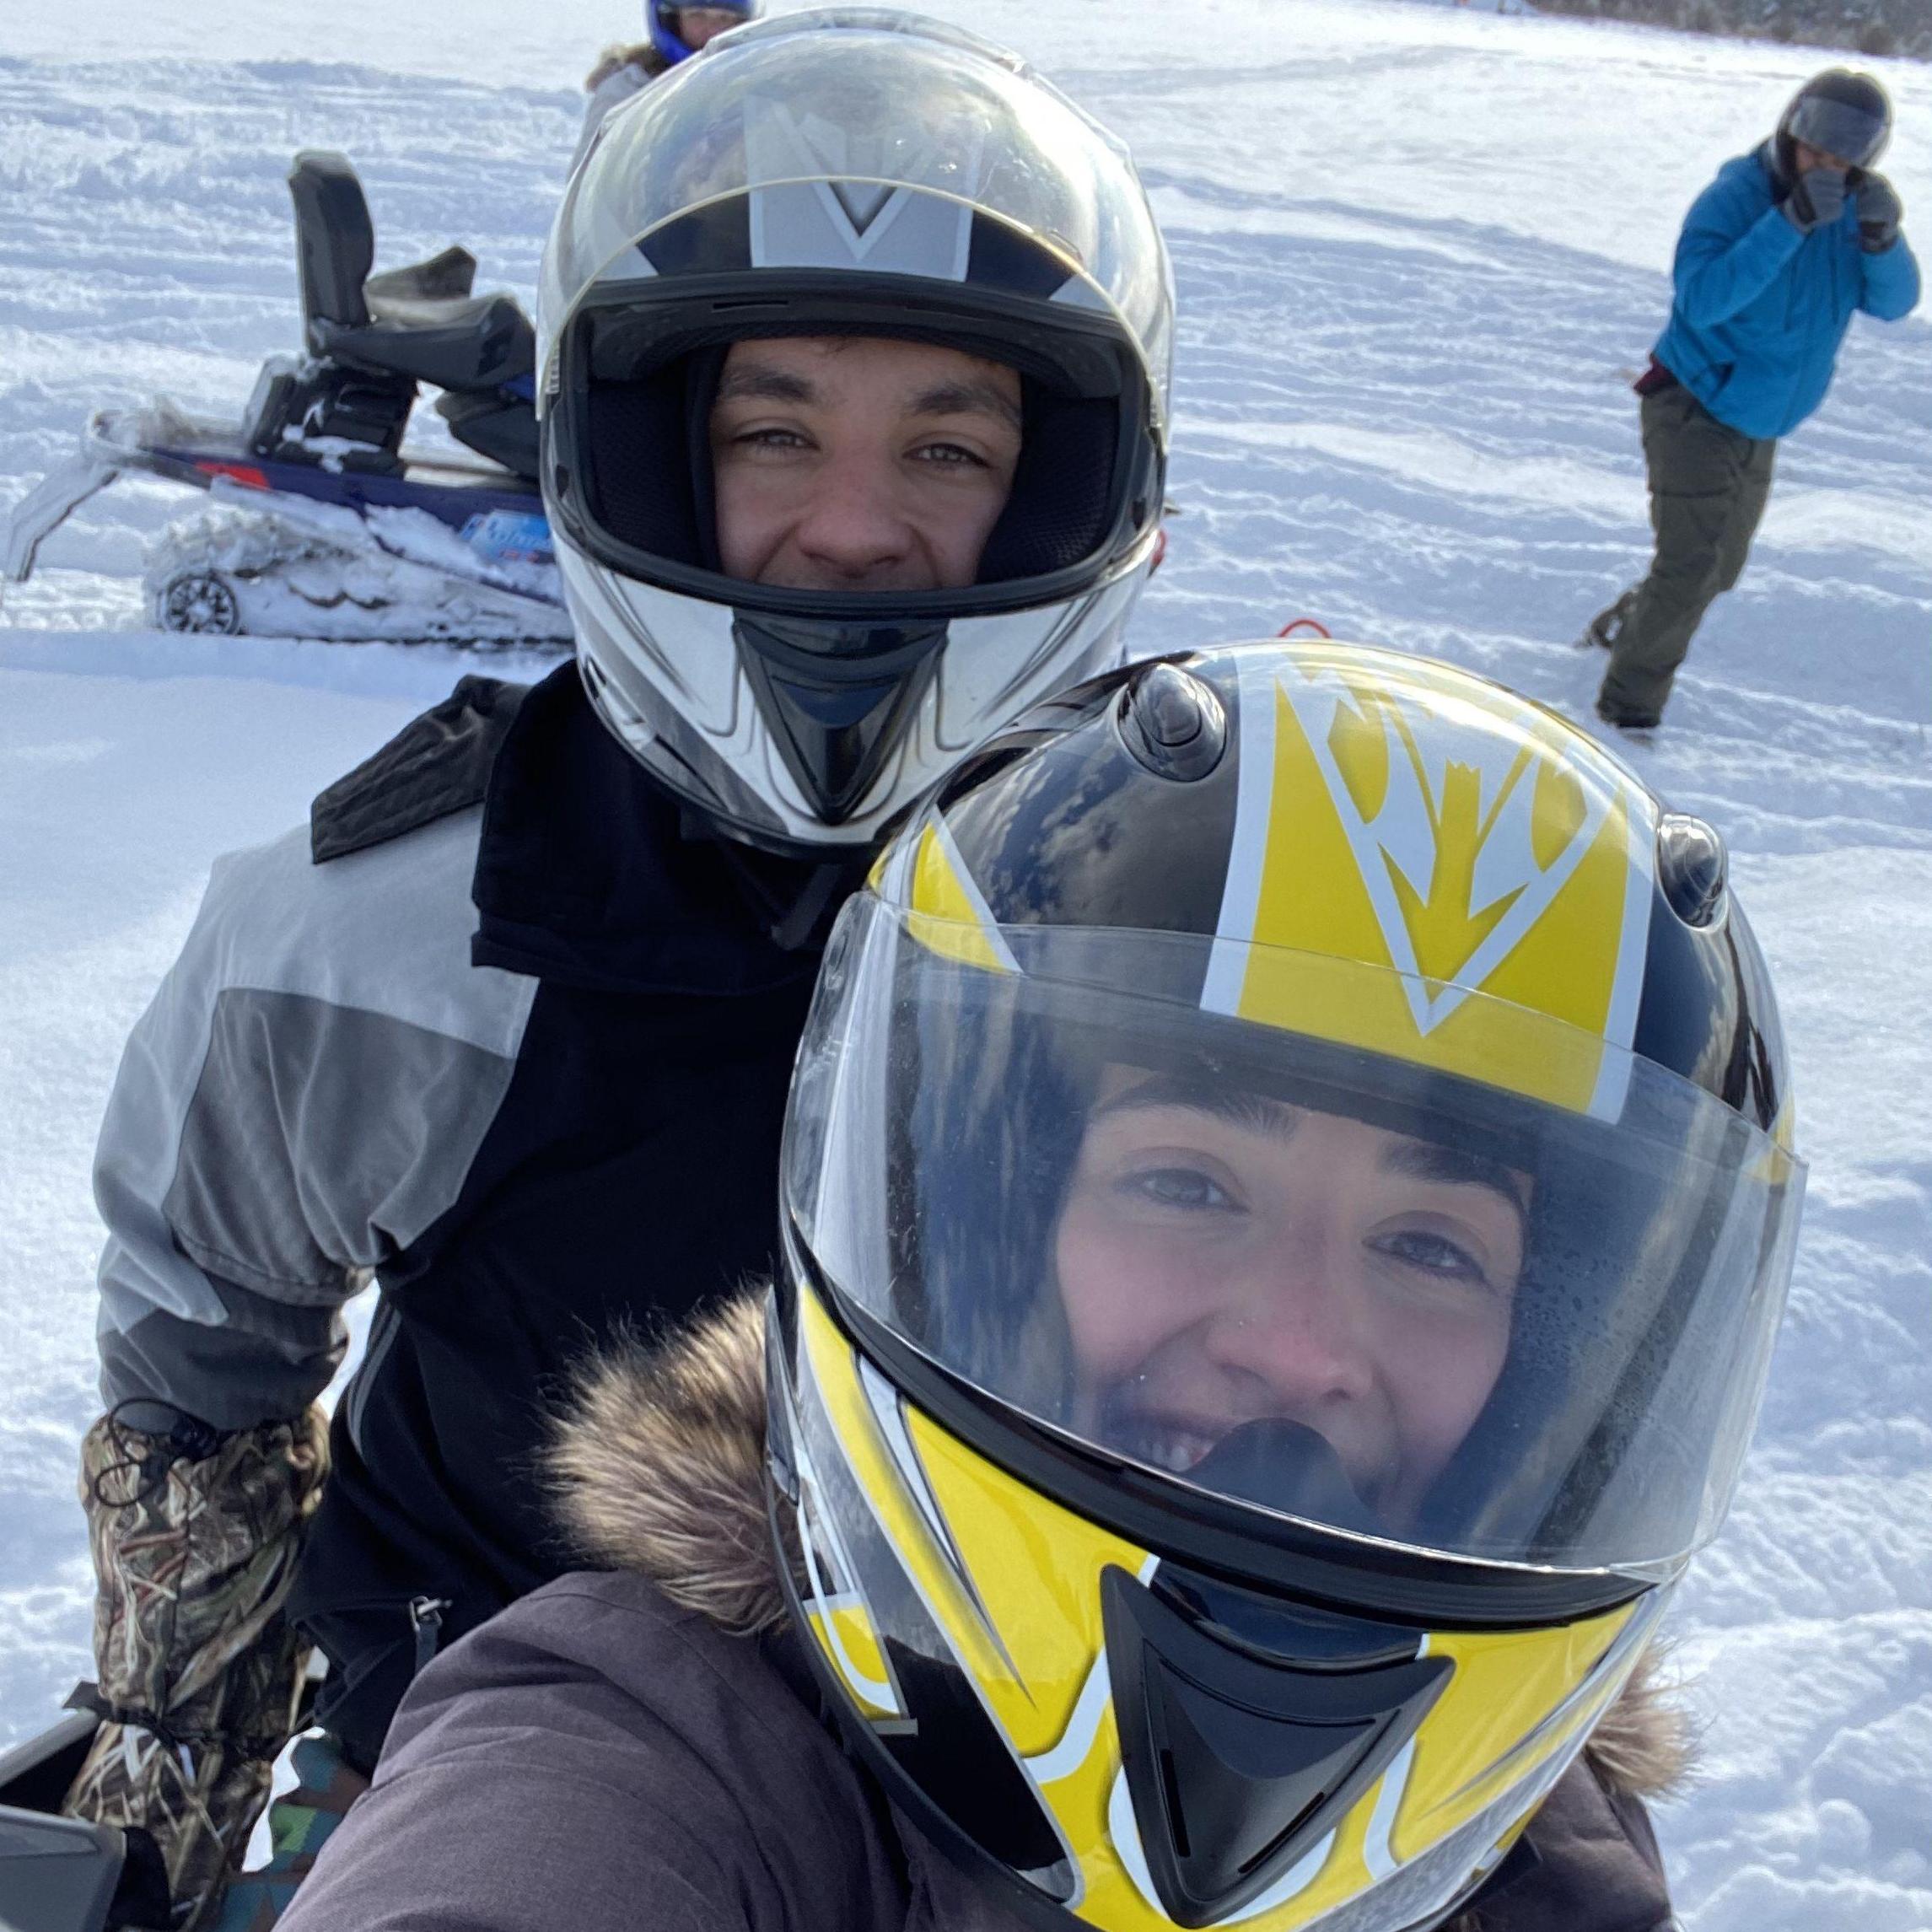 Right before Celine almost killed Joe on a snowmobile